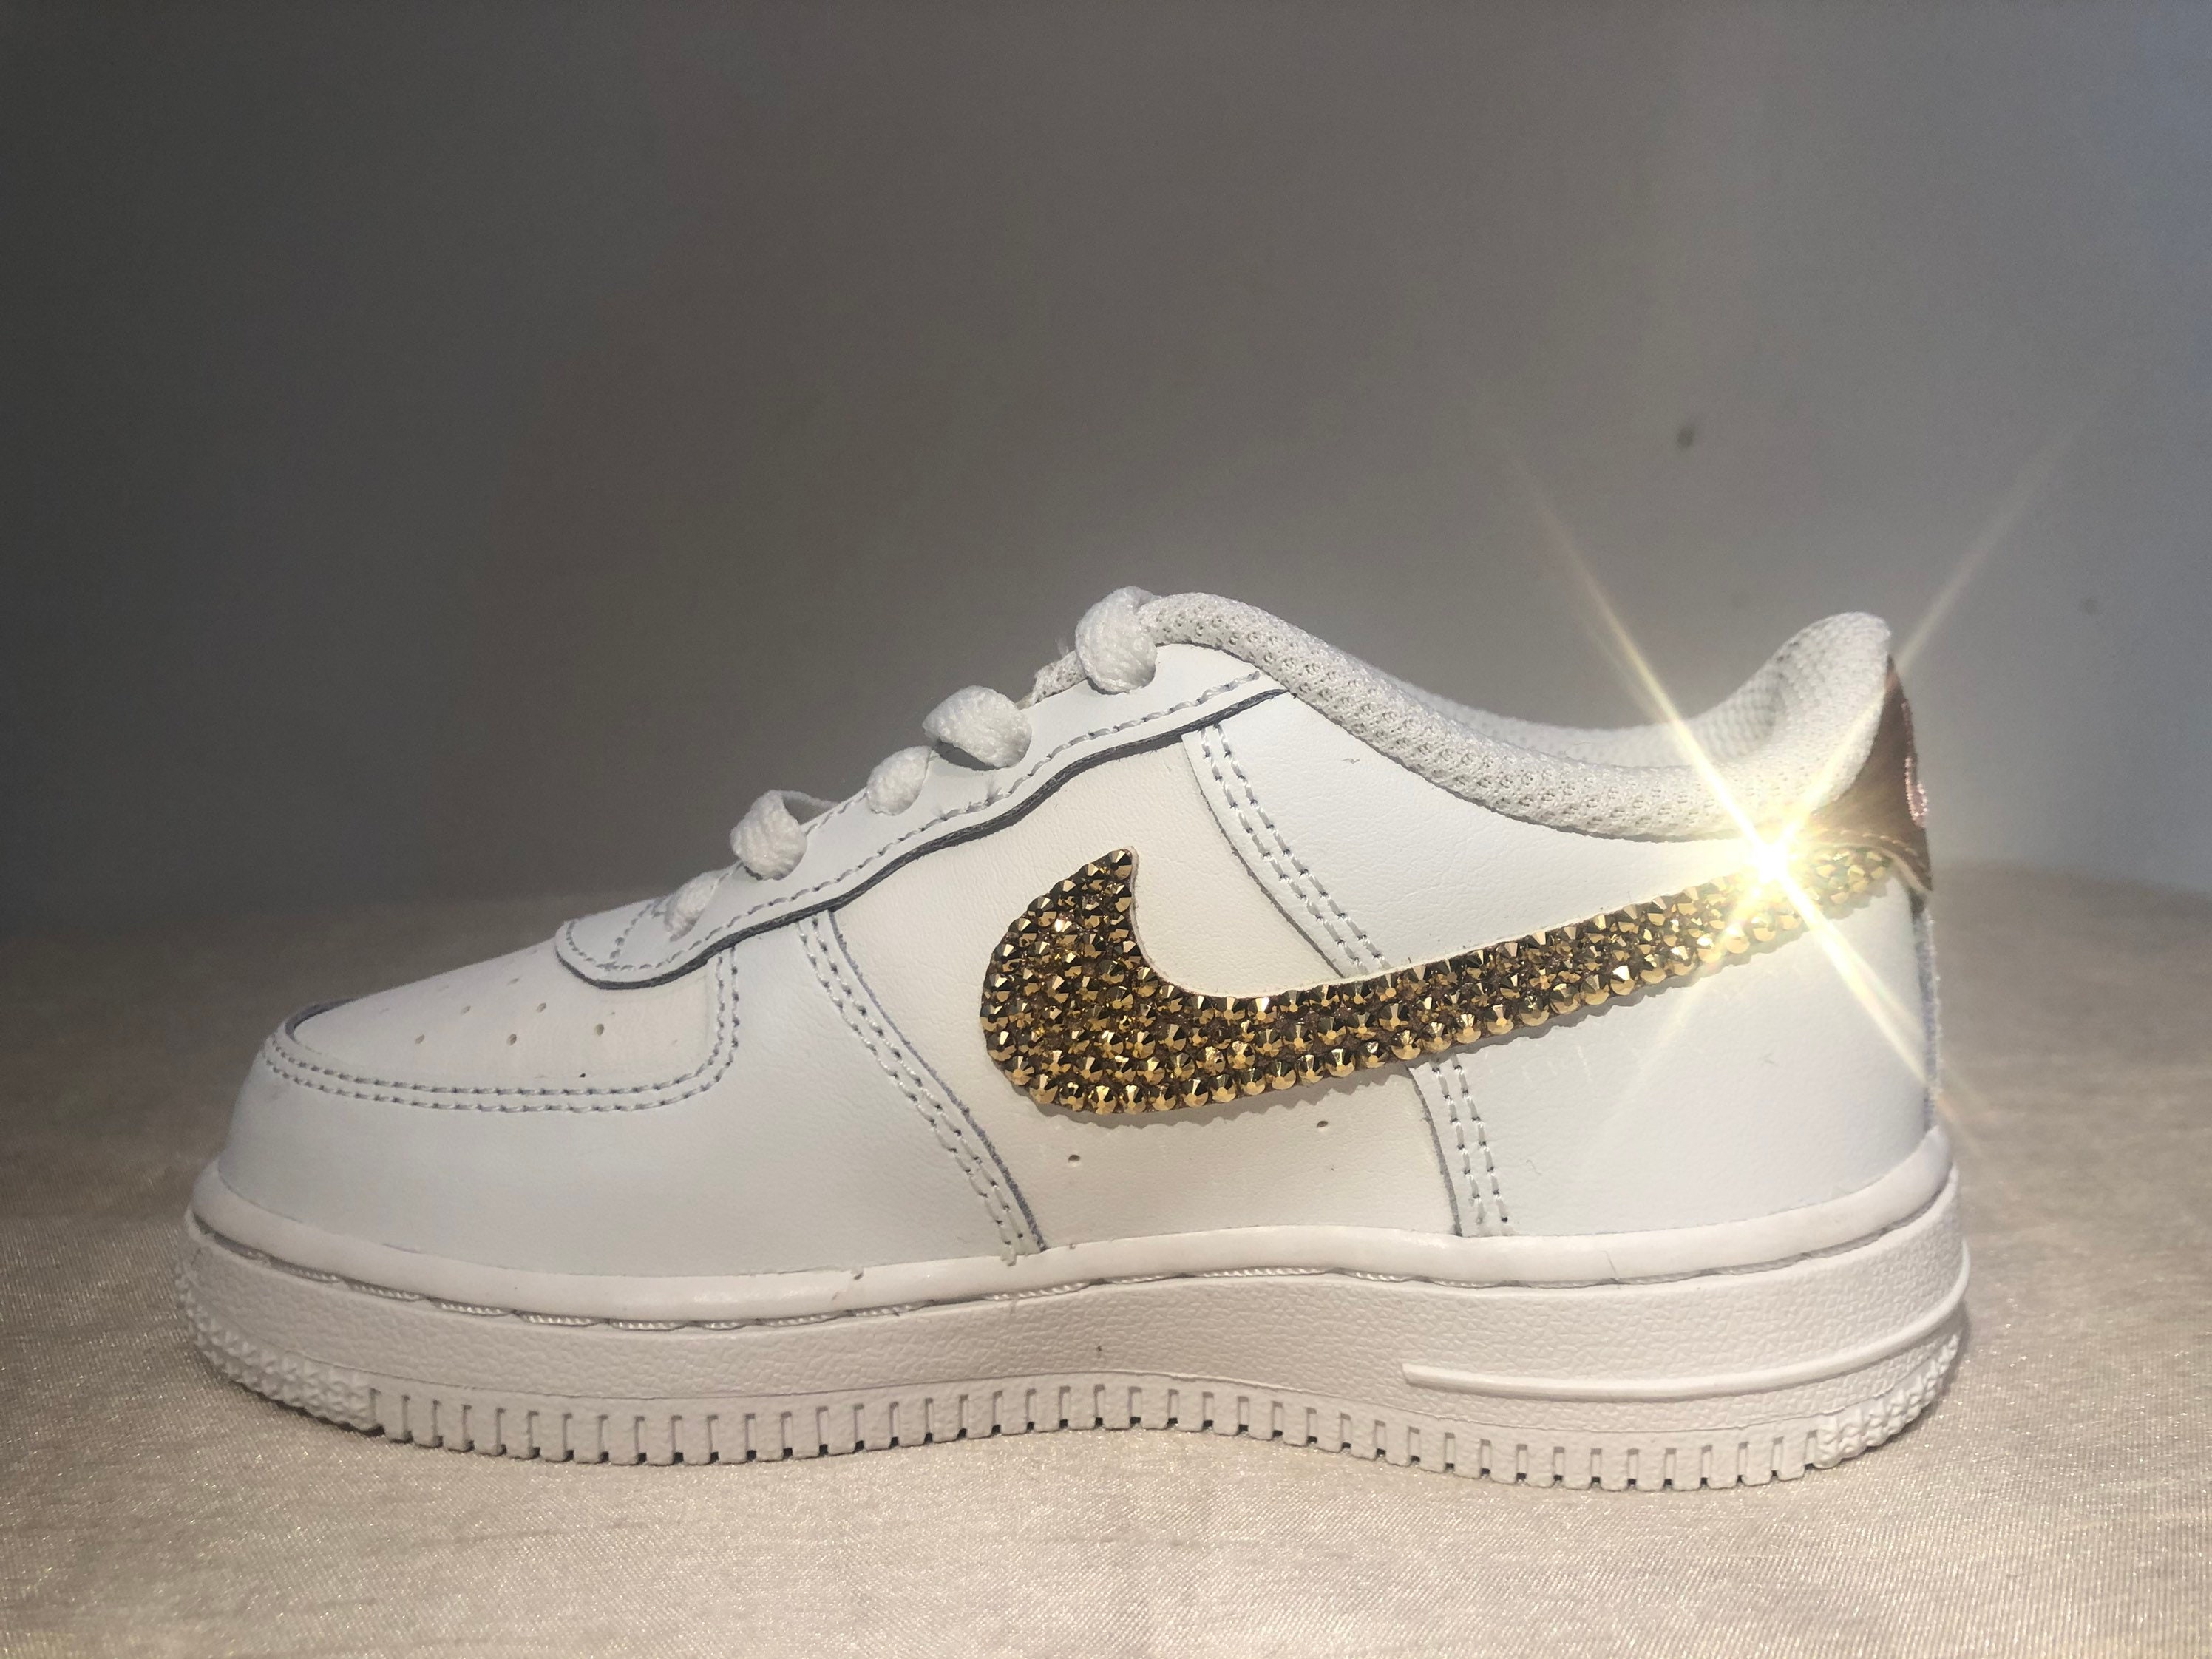 Swarovski Nike Air Force 1s For Toddlers Rose Gold/White with | Etsy